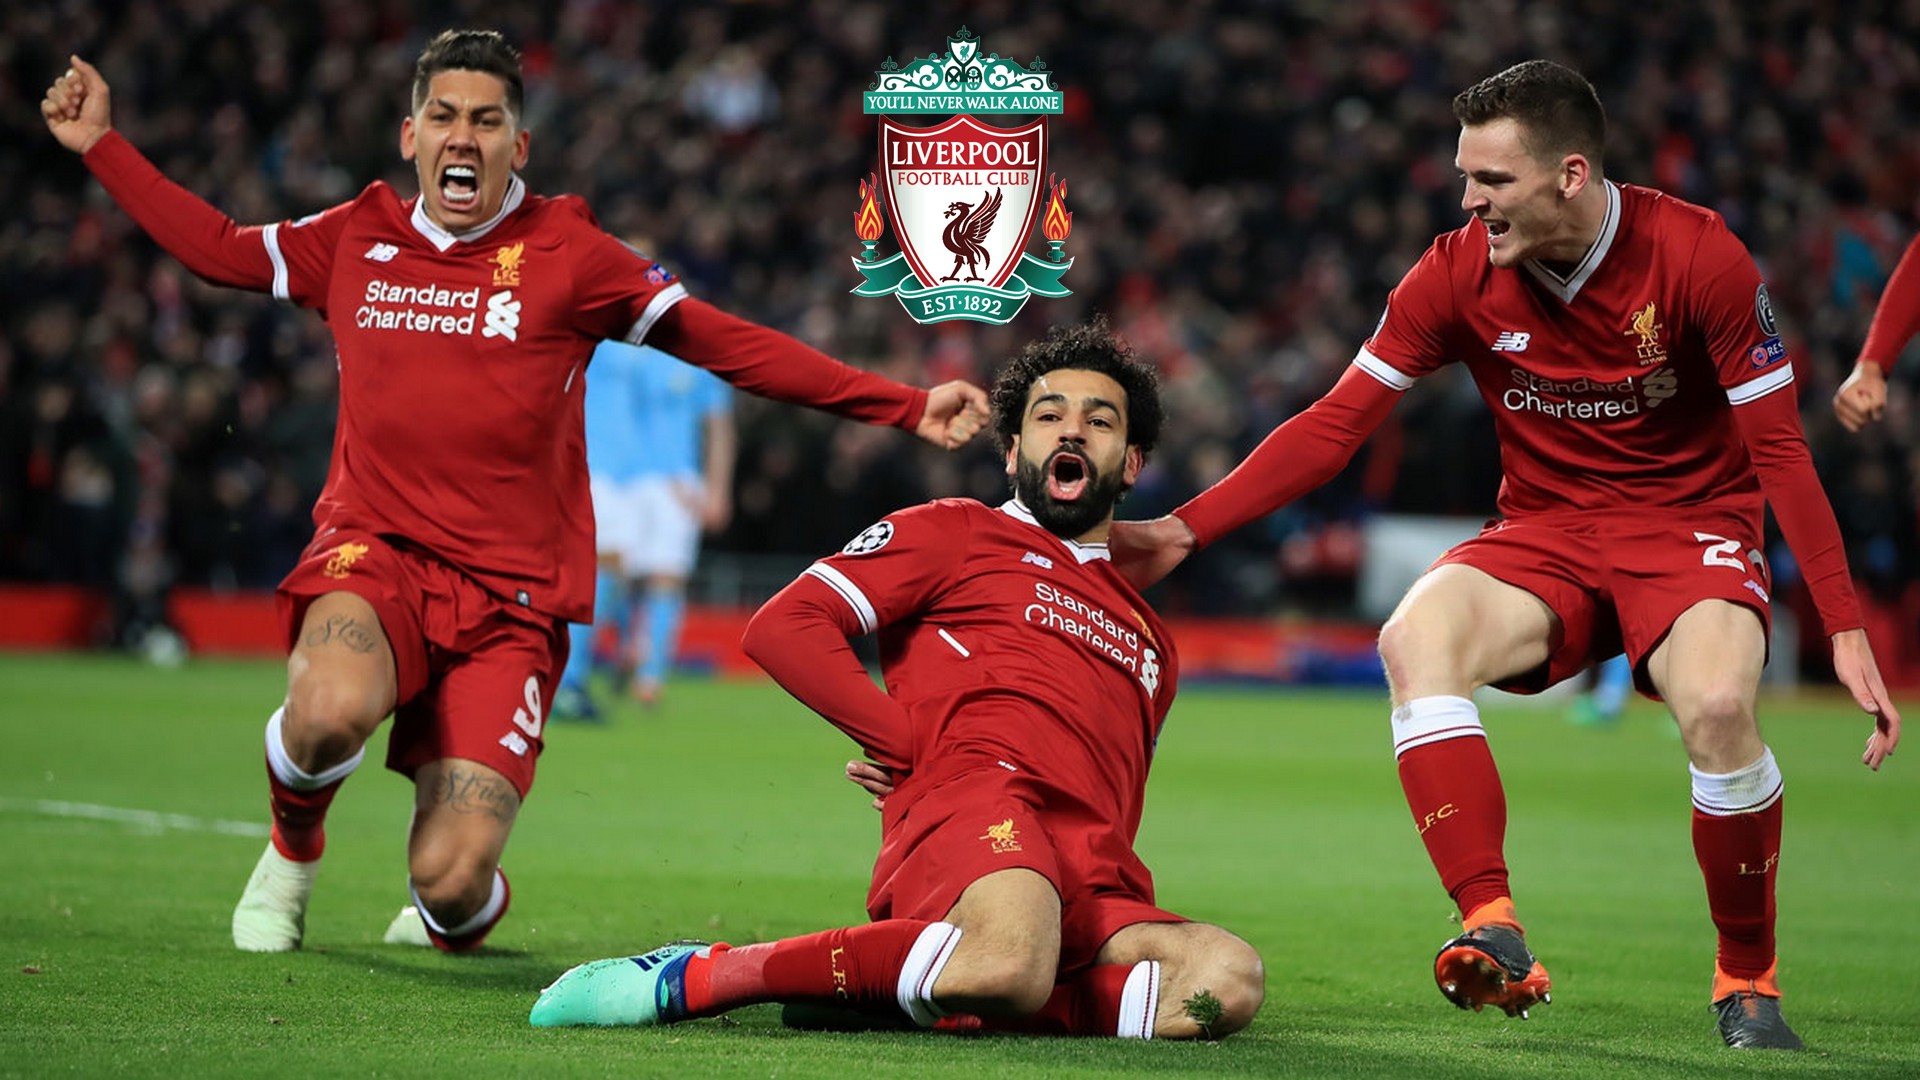 Mohamed Salah Desktop Backgrounds With Resolution 1920X1080 pixel. You can make this wallpaper for your Desktop Computer Backgrounds, Mac Wallpapers, Android Lock screen or iPhone Screensavers